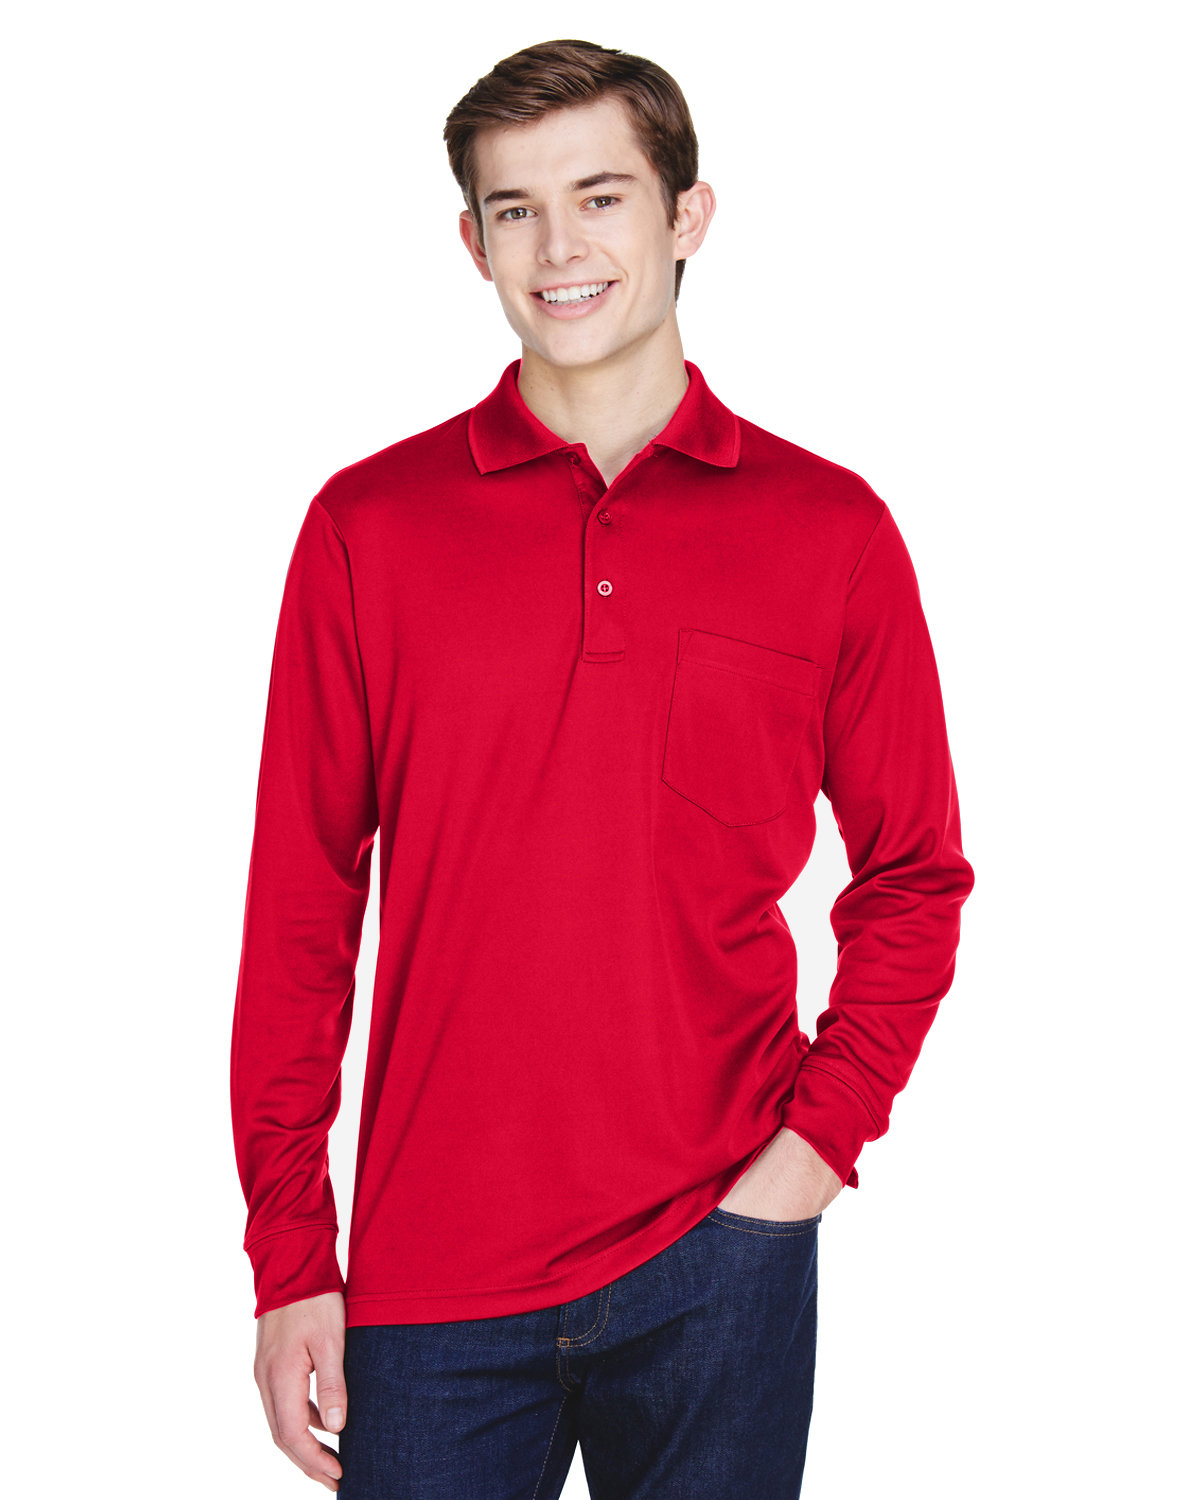 Core365 Adult Pinnacle Performance Long-Sleeve Piqué Polo with Pocket CLASSIC RED 